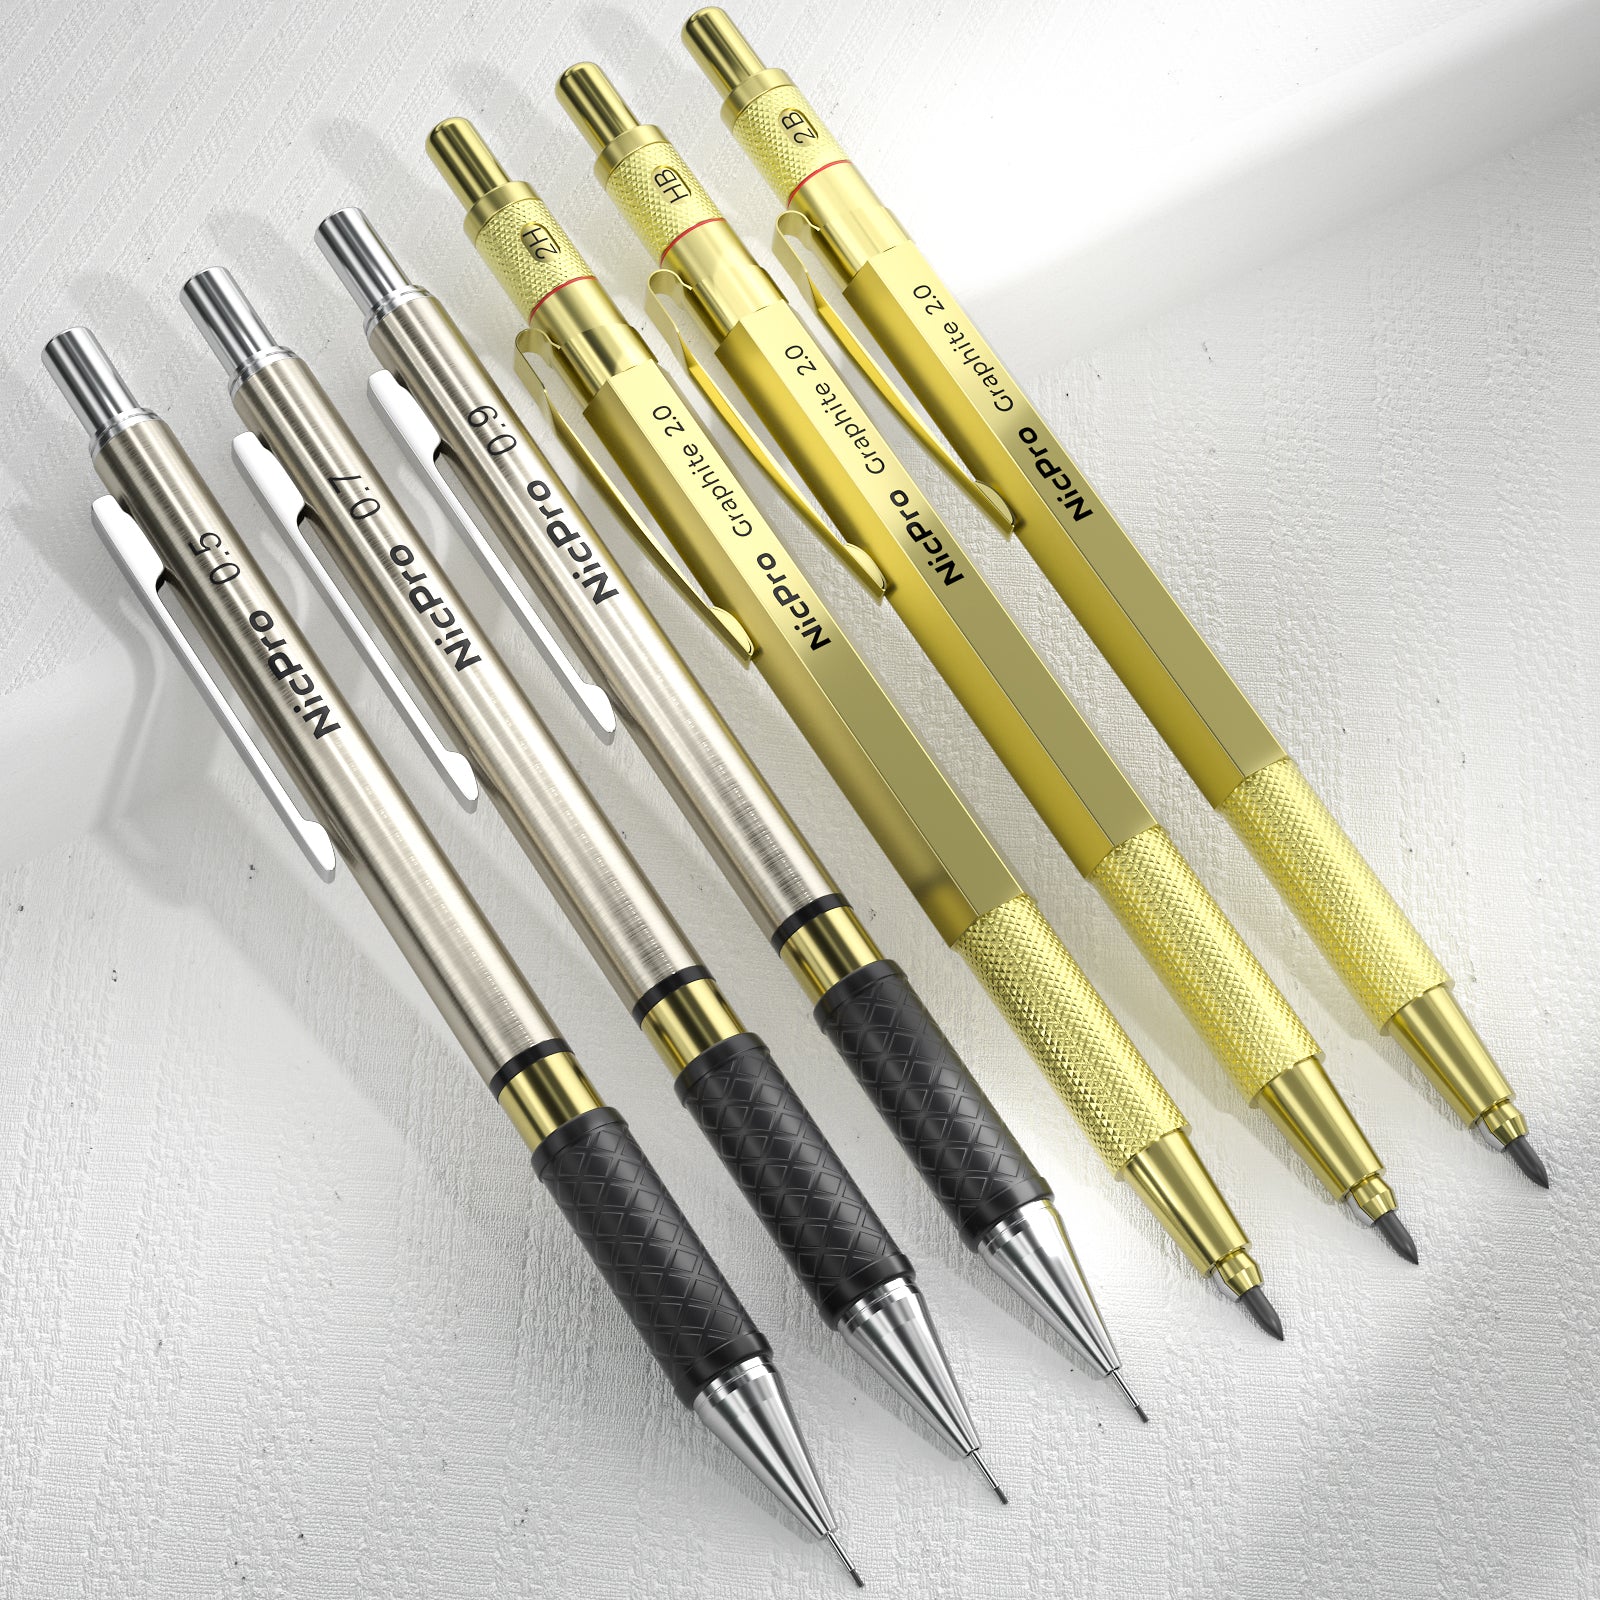 Nicpro 6PCS Mechanical Pencils Set, 3 PCS 2mm Lead Holder (2B HB 2H),  Clutch Propelling Drafting Pencil 0.5 mm & 0.7 mm & 0.9 mm for  Writing,Sketching